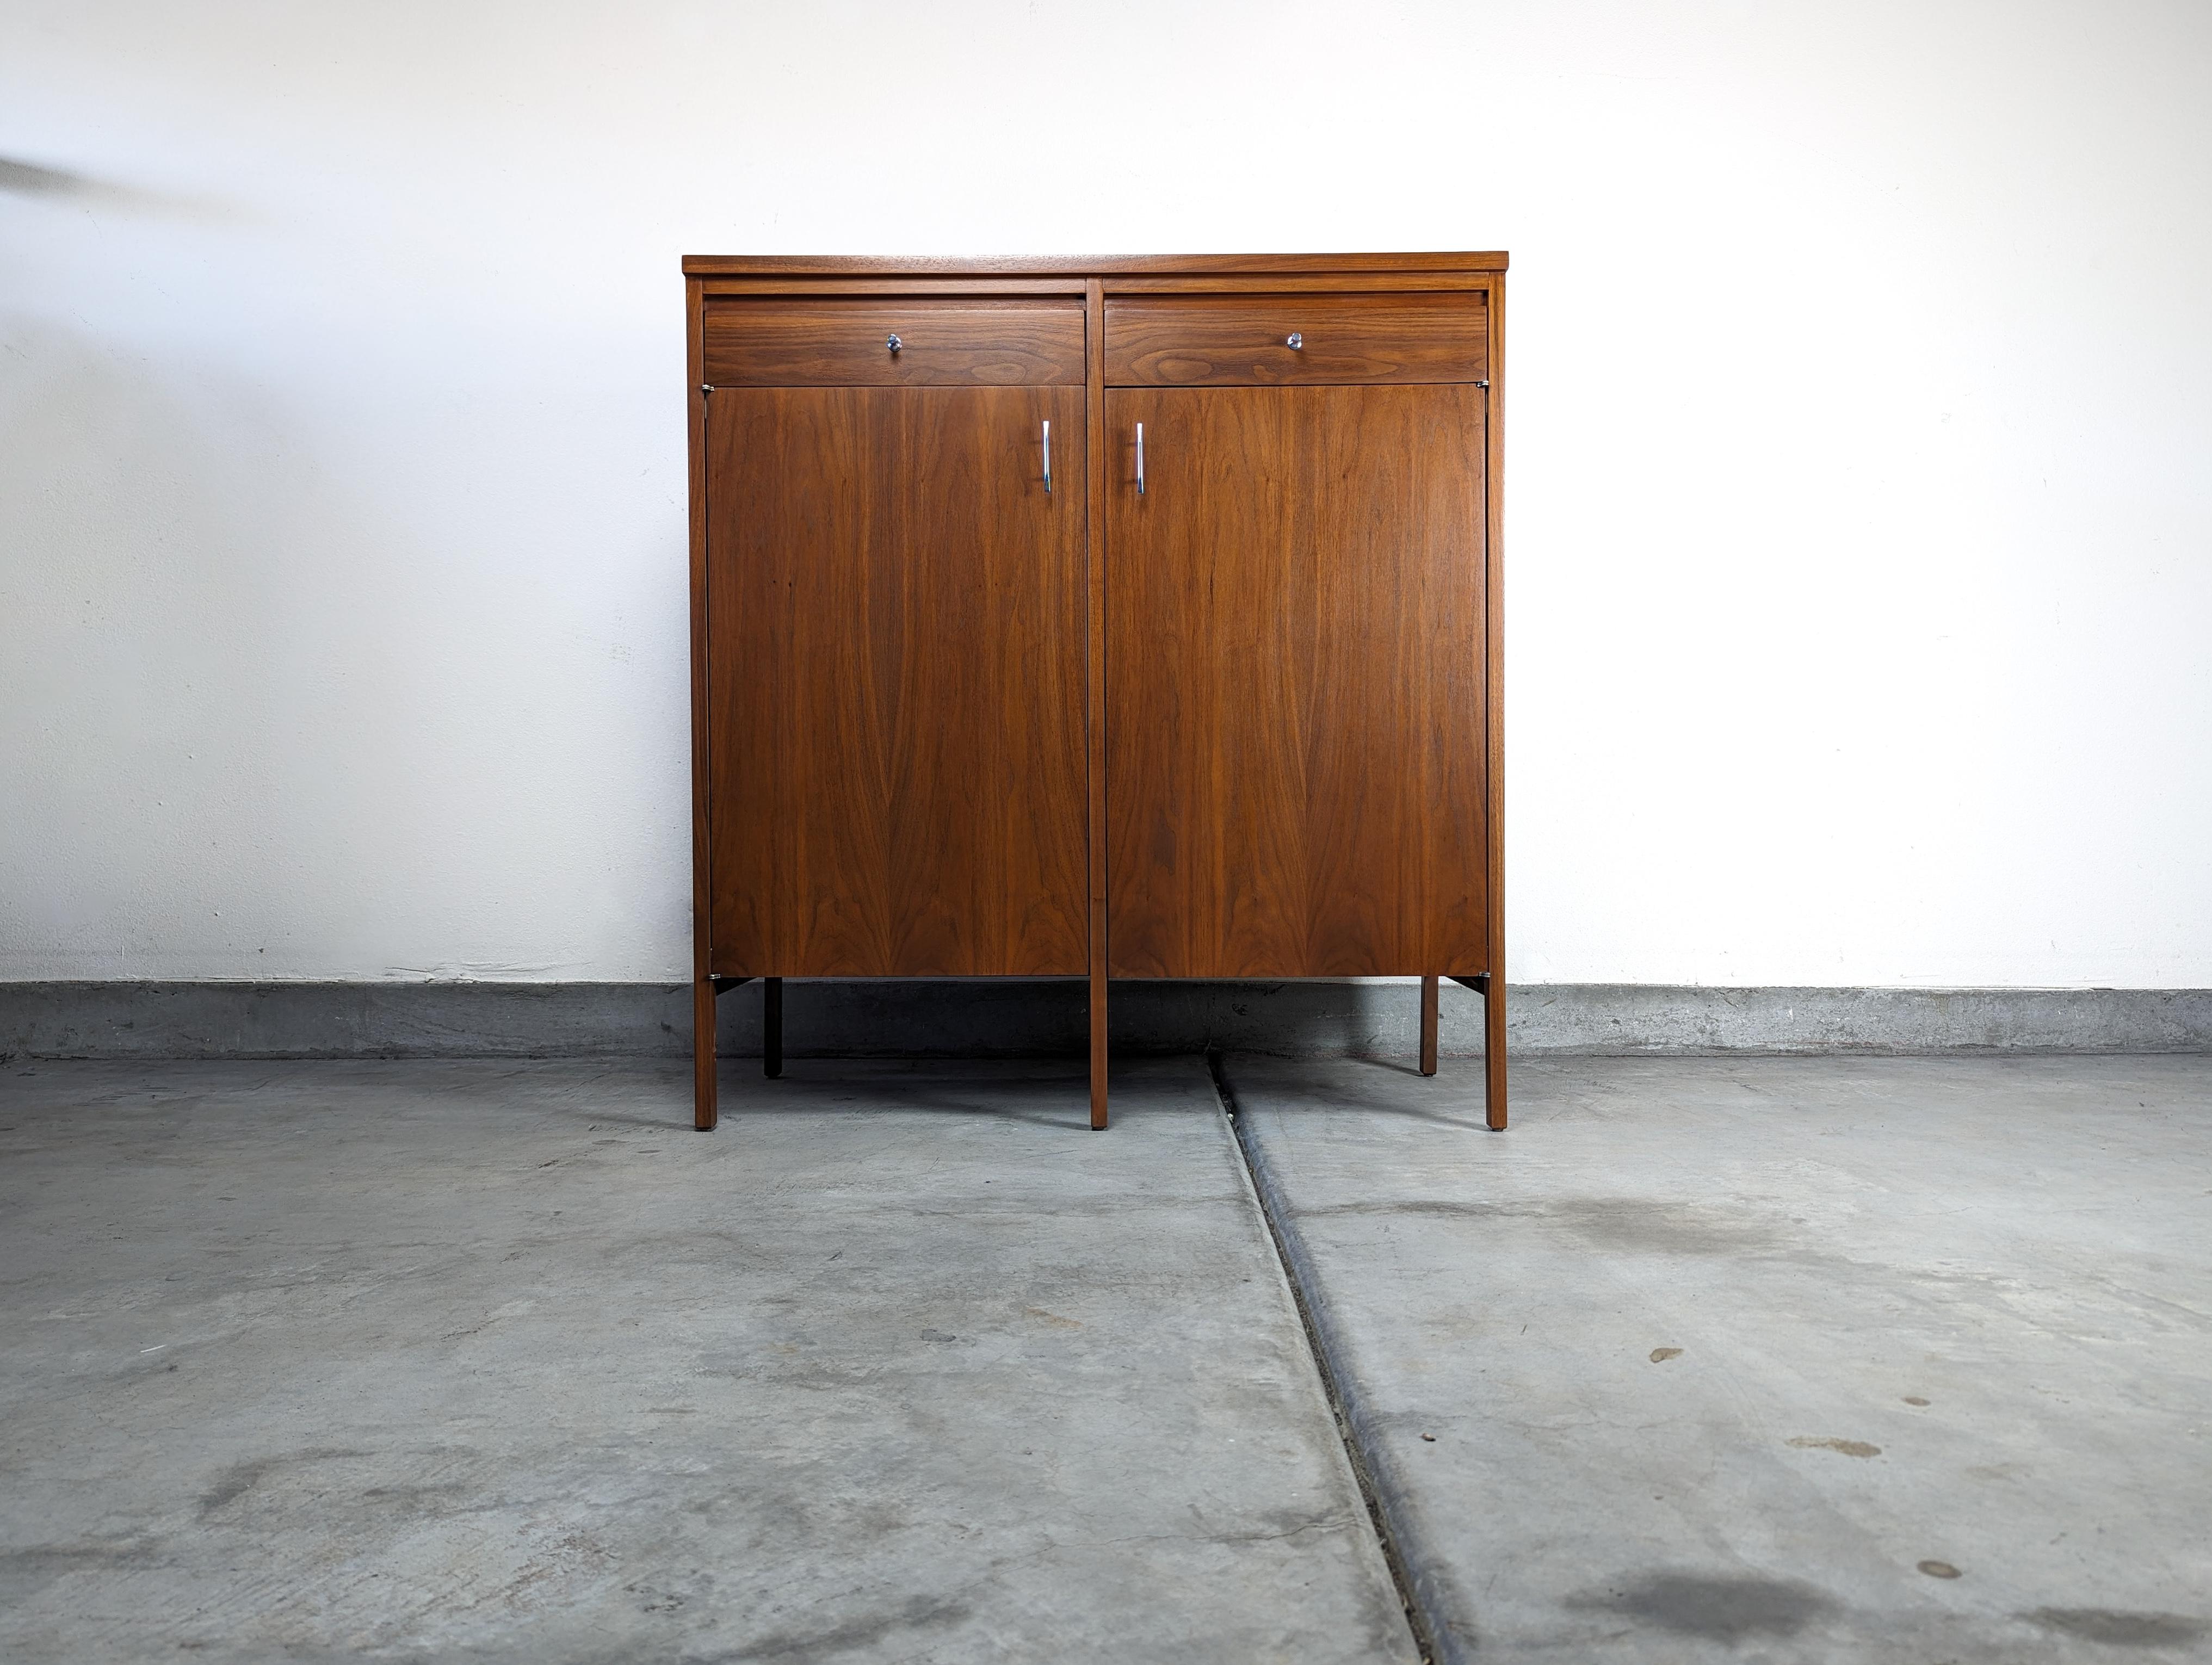 Prepare yourself to indulge in the timeless elegance and sophistication of mid-century modern design with this rare model of the 'Delineator' series Chest of Drawers. Designed by the renowned Paul McCobb and skillfully crafted by Lane in the 1960s,